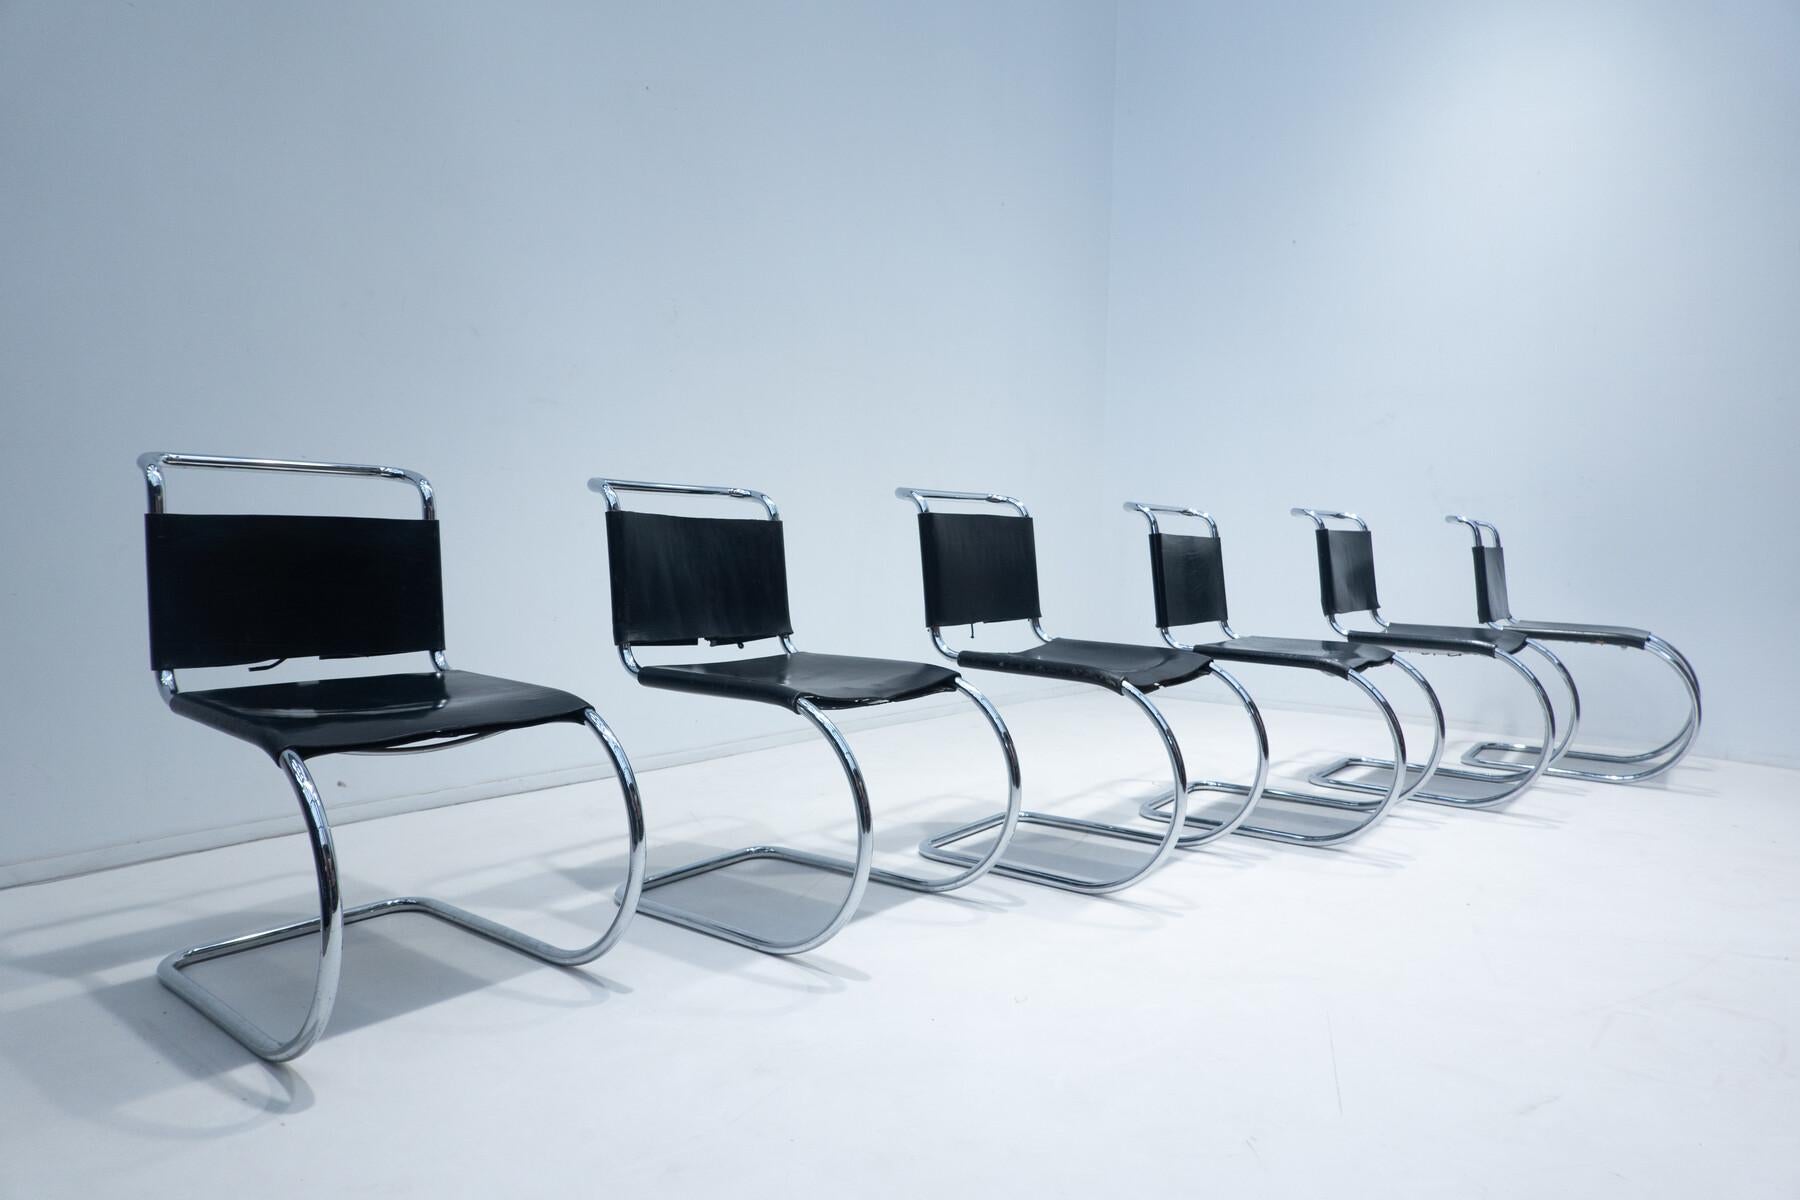 Set of 6 MR10 Chairs by Mies van der Rohe, Knoll International, Black Leather.